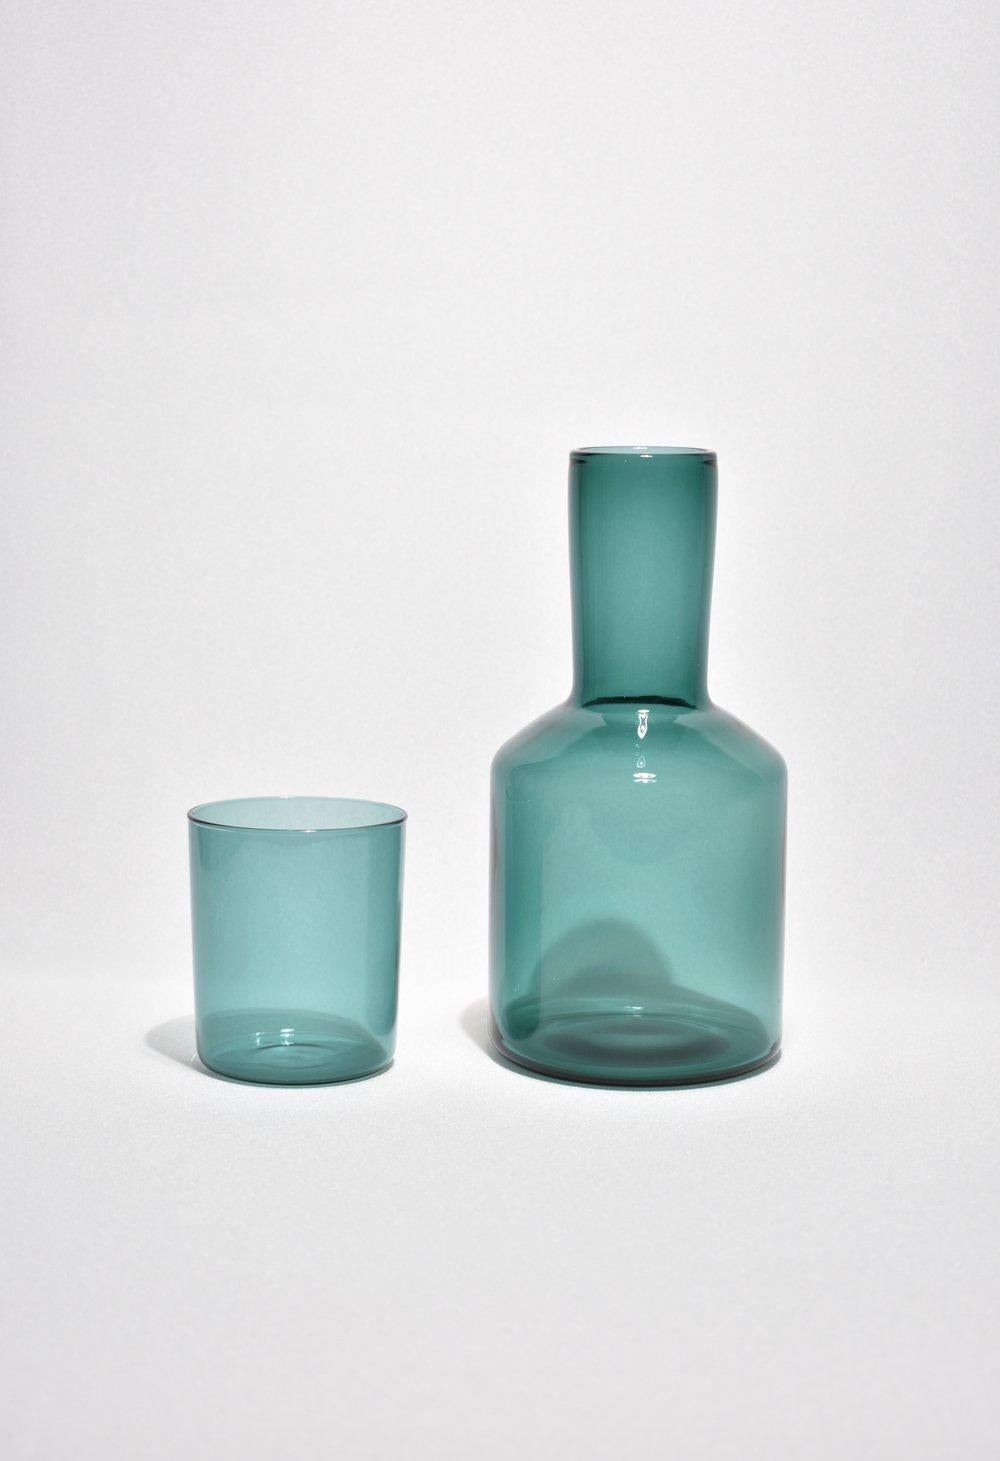 Teal carafe set by Maison Balzac inspired by the traditional sets used in France and displayed on a bedside table at night. 

Food grade colored glass, individually mouth blown. 
Heat and cold resistant.
Hand wash